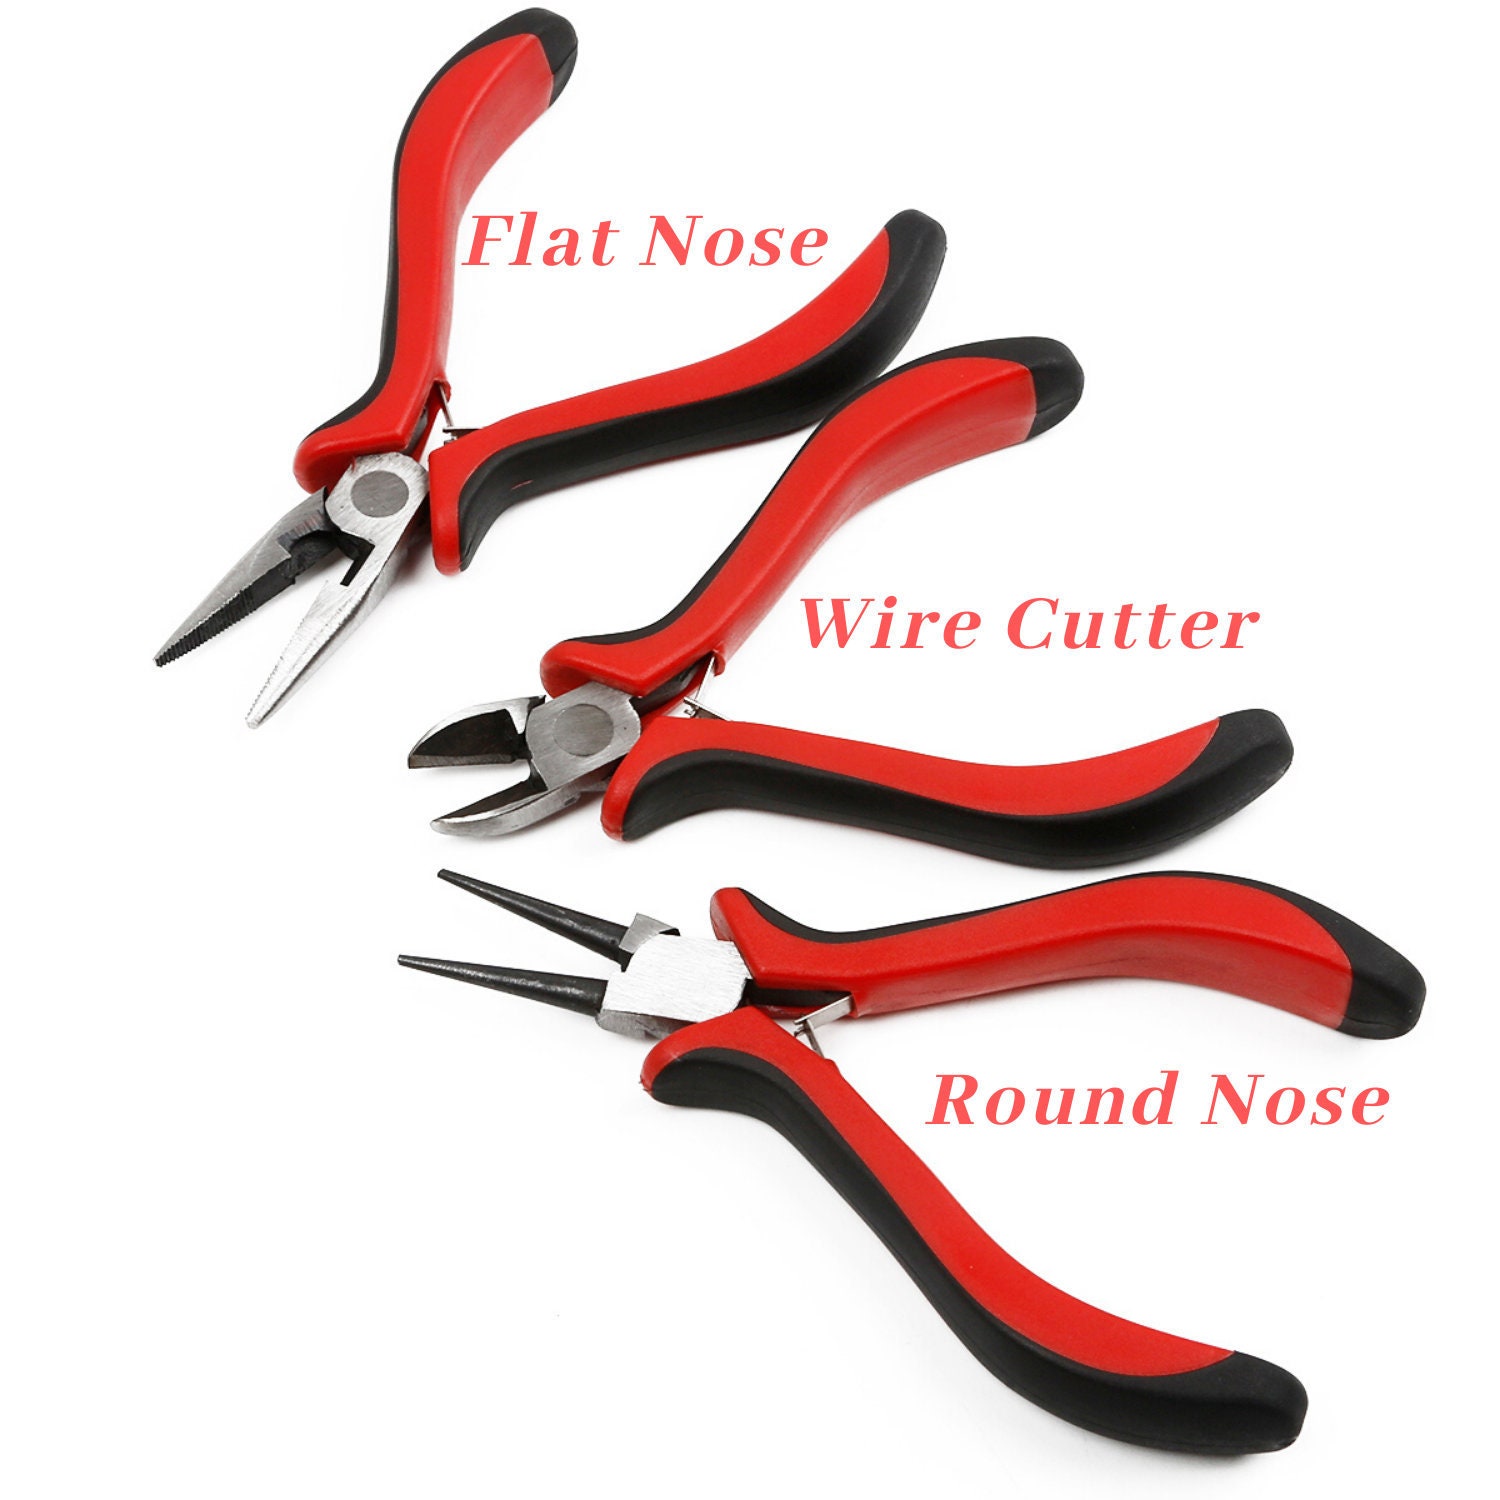 Half-round Flat Nose Pliers Molded Ridges Handles Jewelry Making Pliers  Tools.